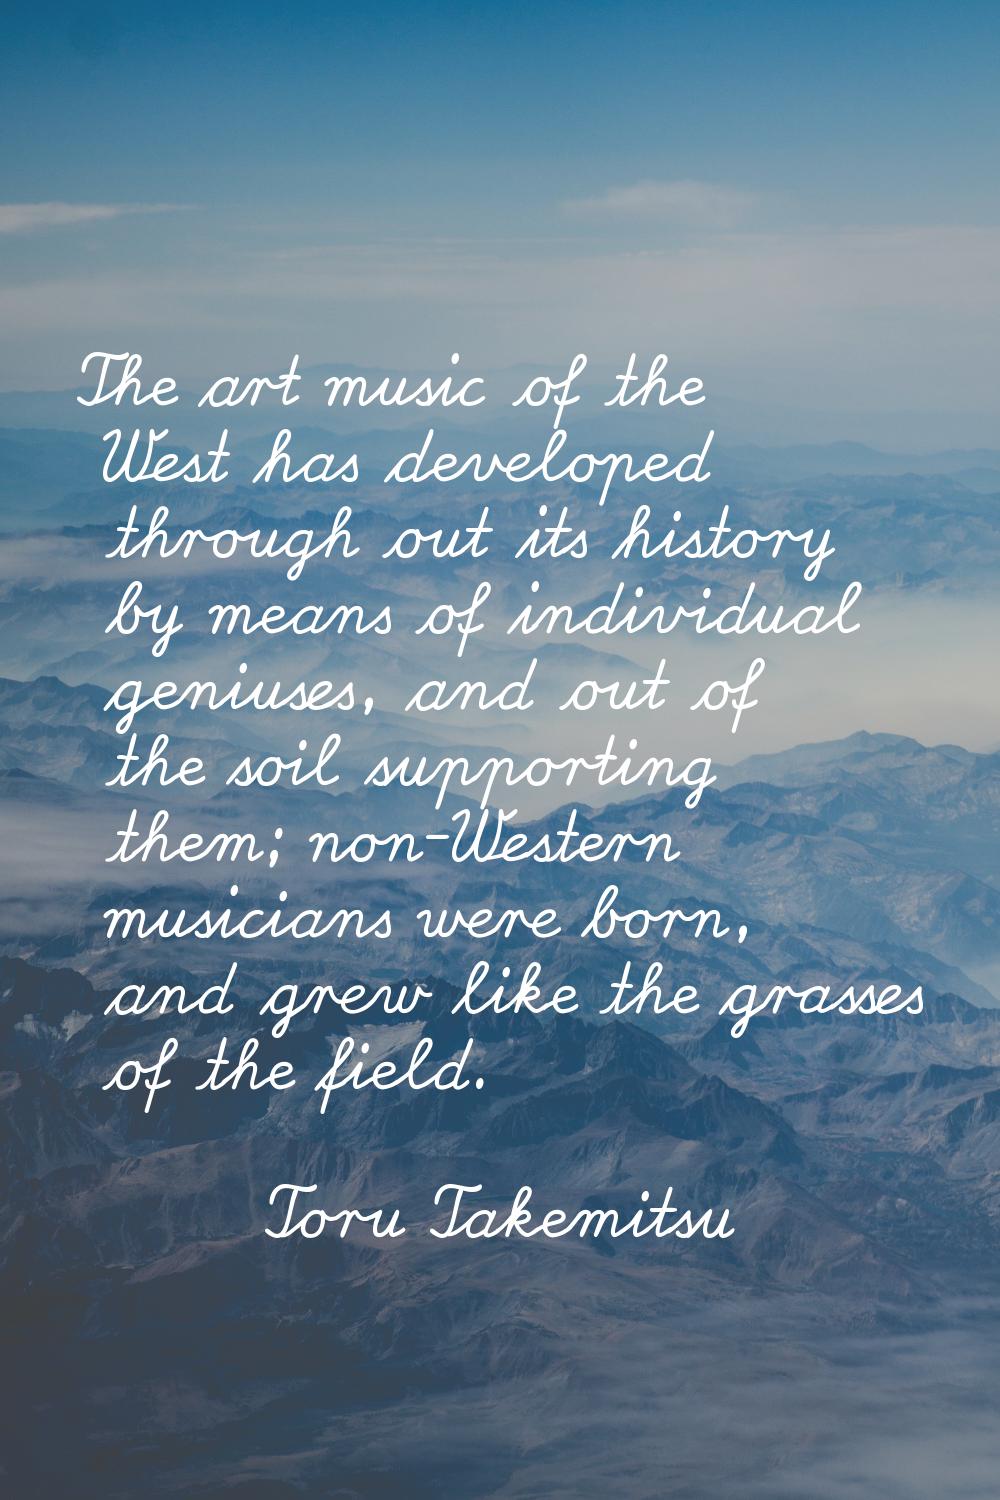 The art music of the West has developed through out its history by means of individual geniuses, an